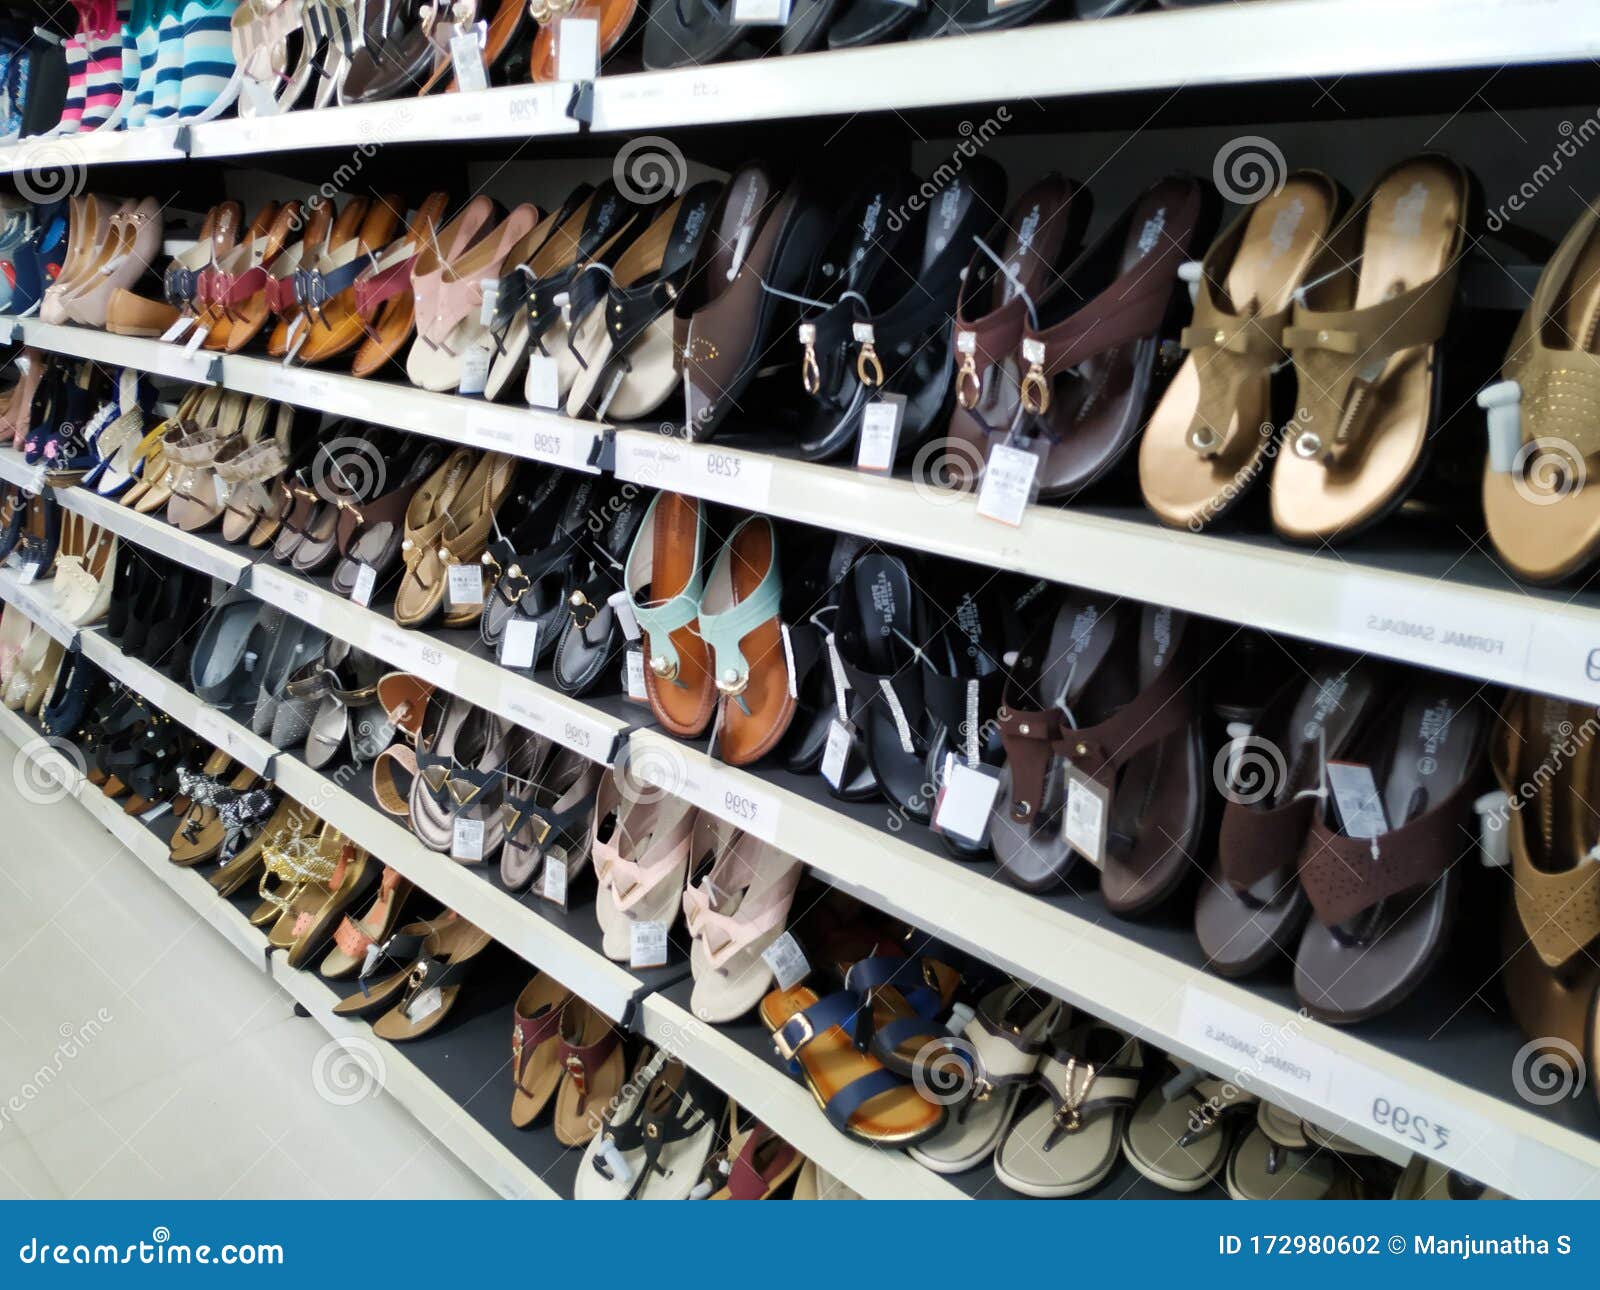 Beautiful View of Adult Slippers Hanging in a Slipper Stand at the ...